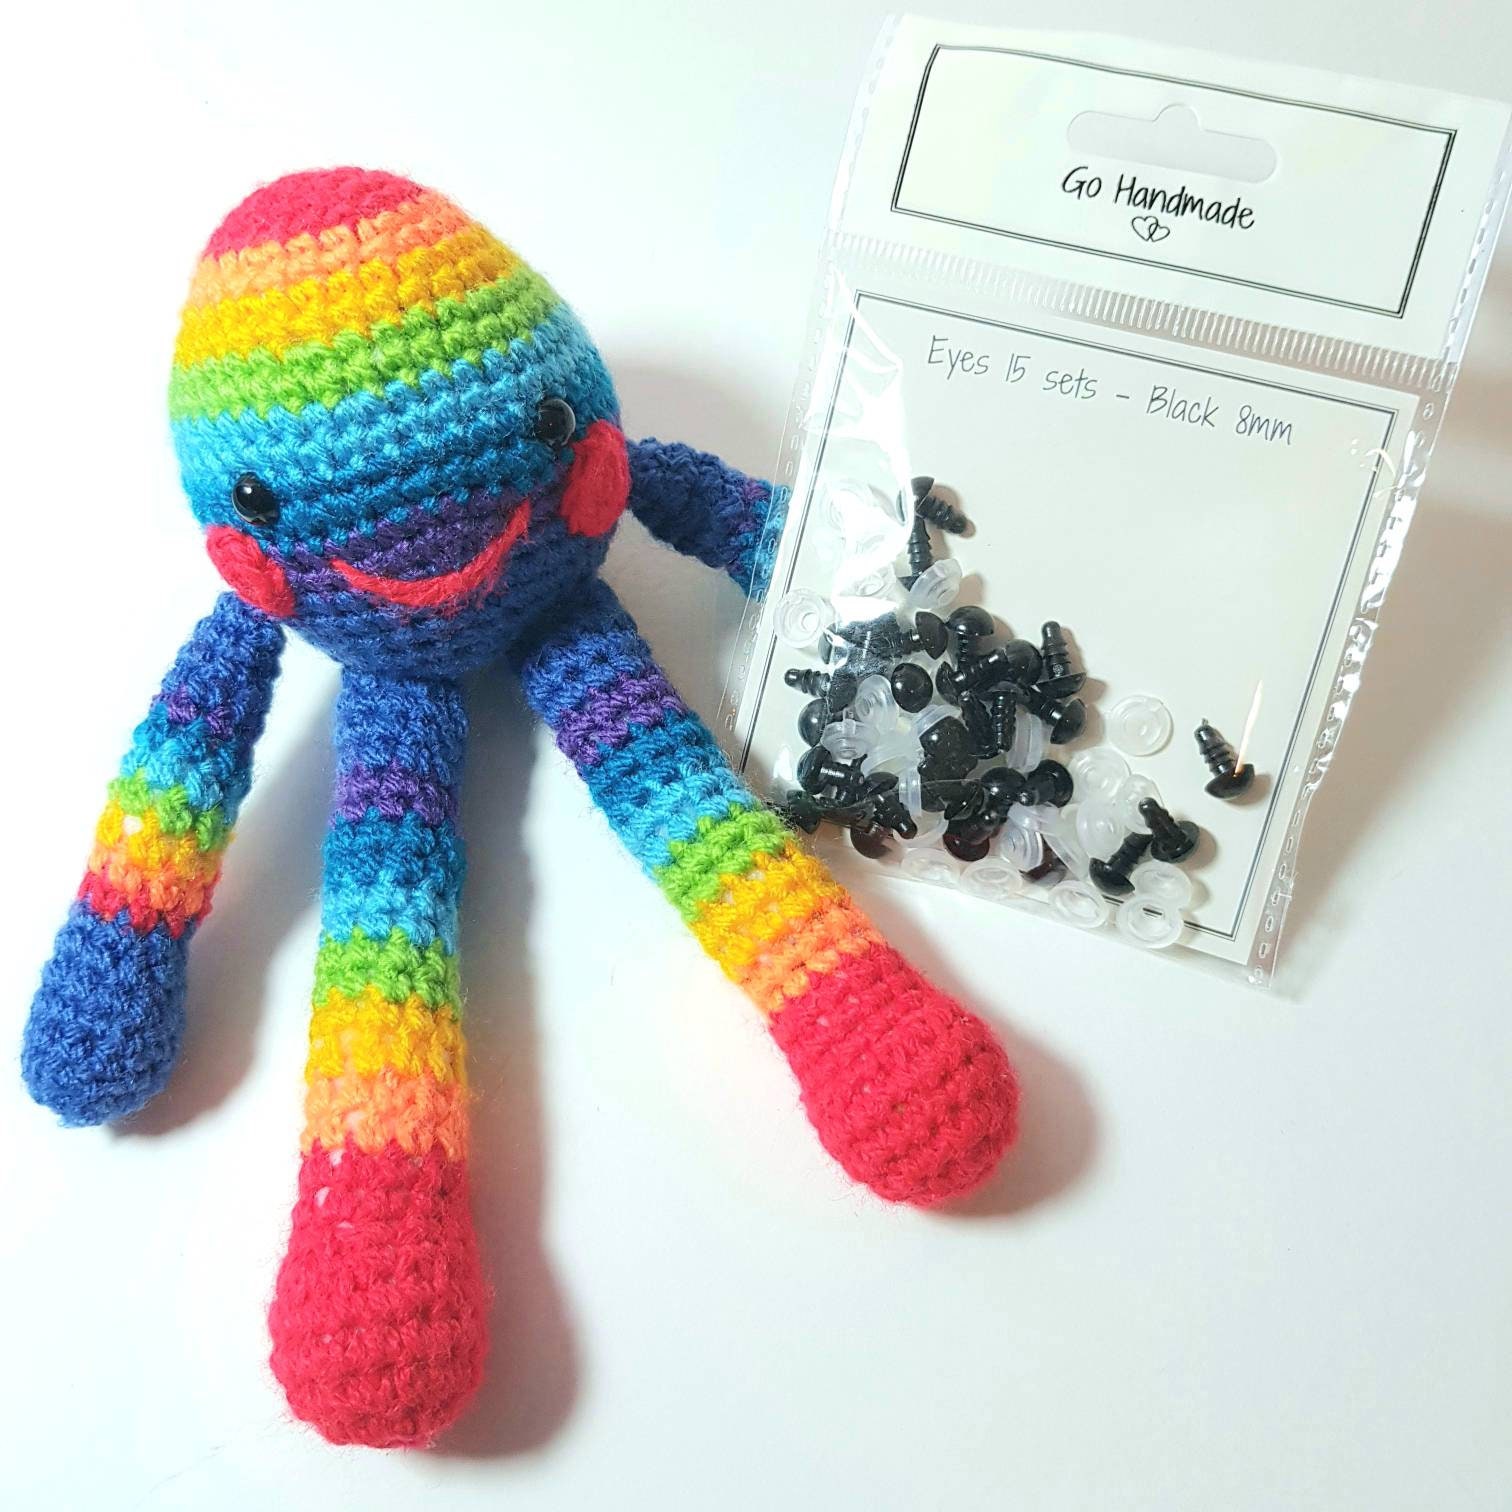 Plastic Safety Eyes And Noses For Amigurumi Crochet Crafts Dolls